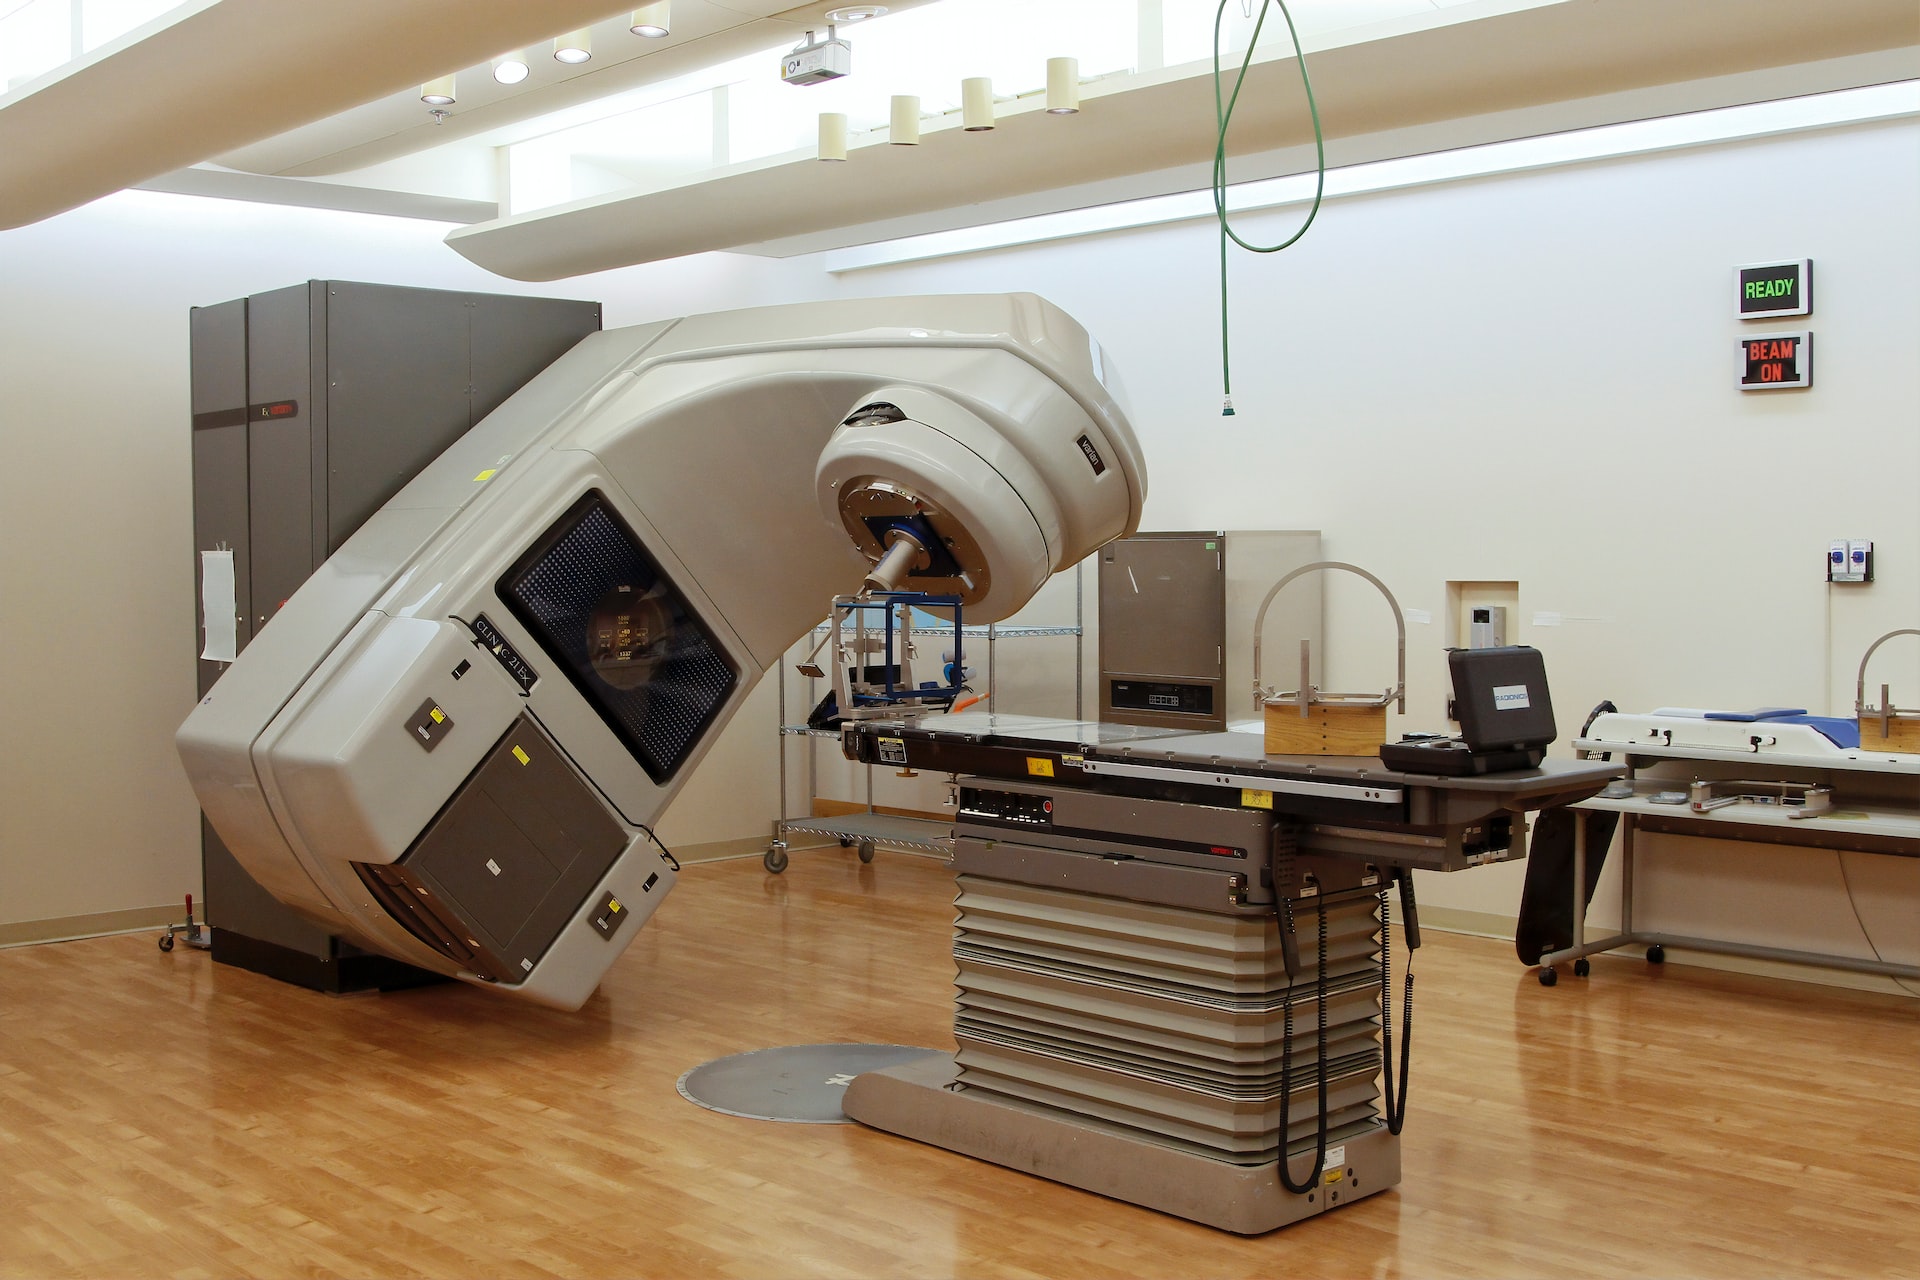 Medical nuclear scanning machine in a hospital room